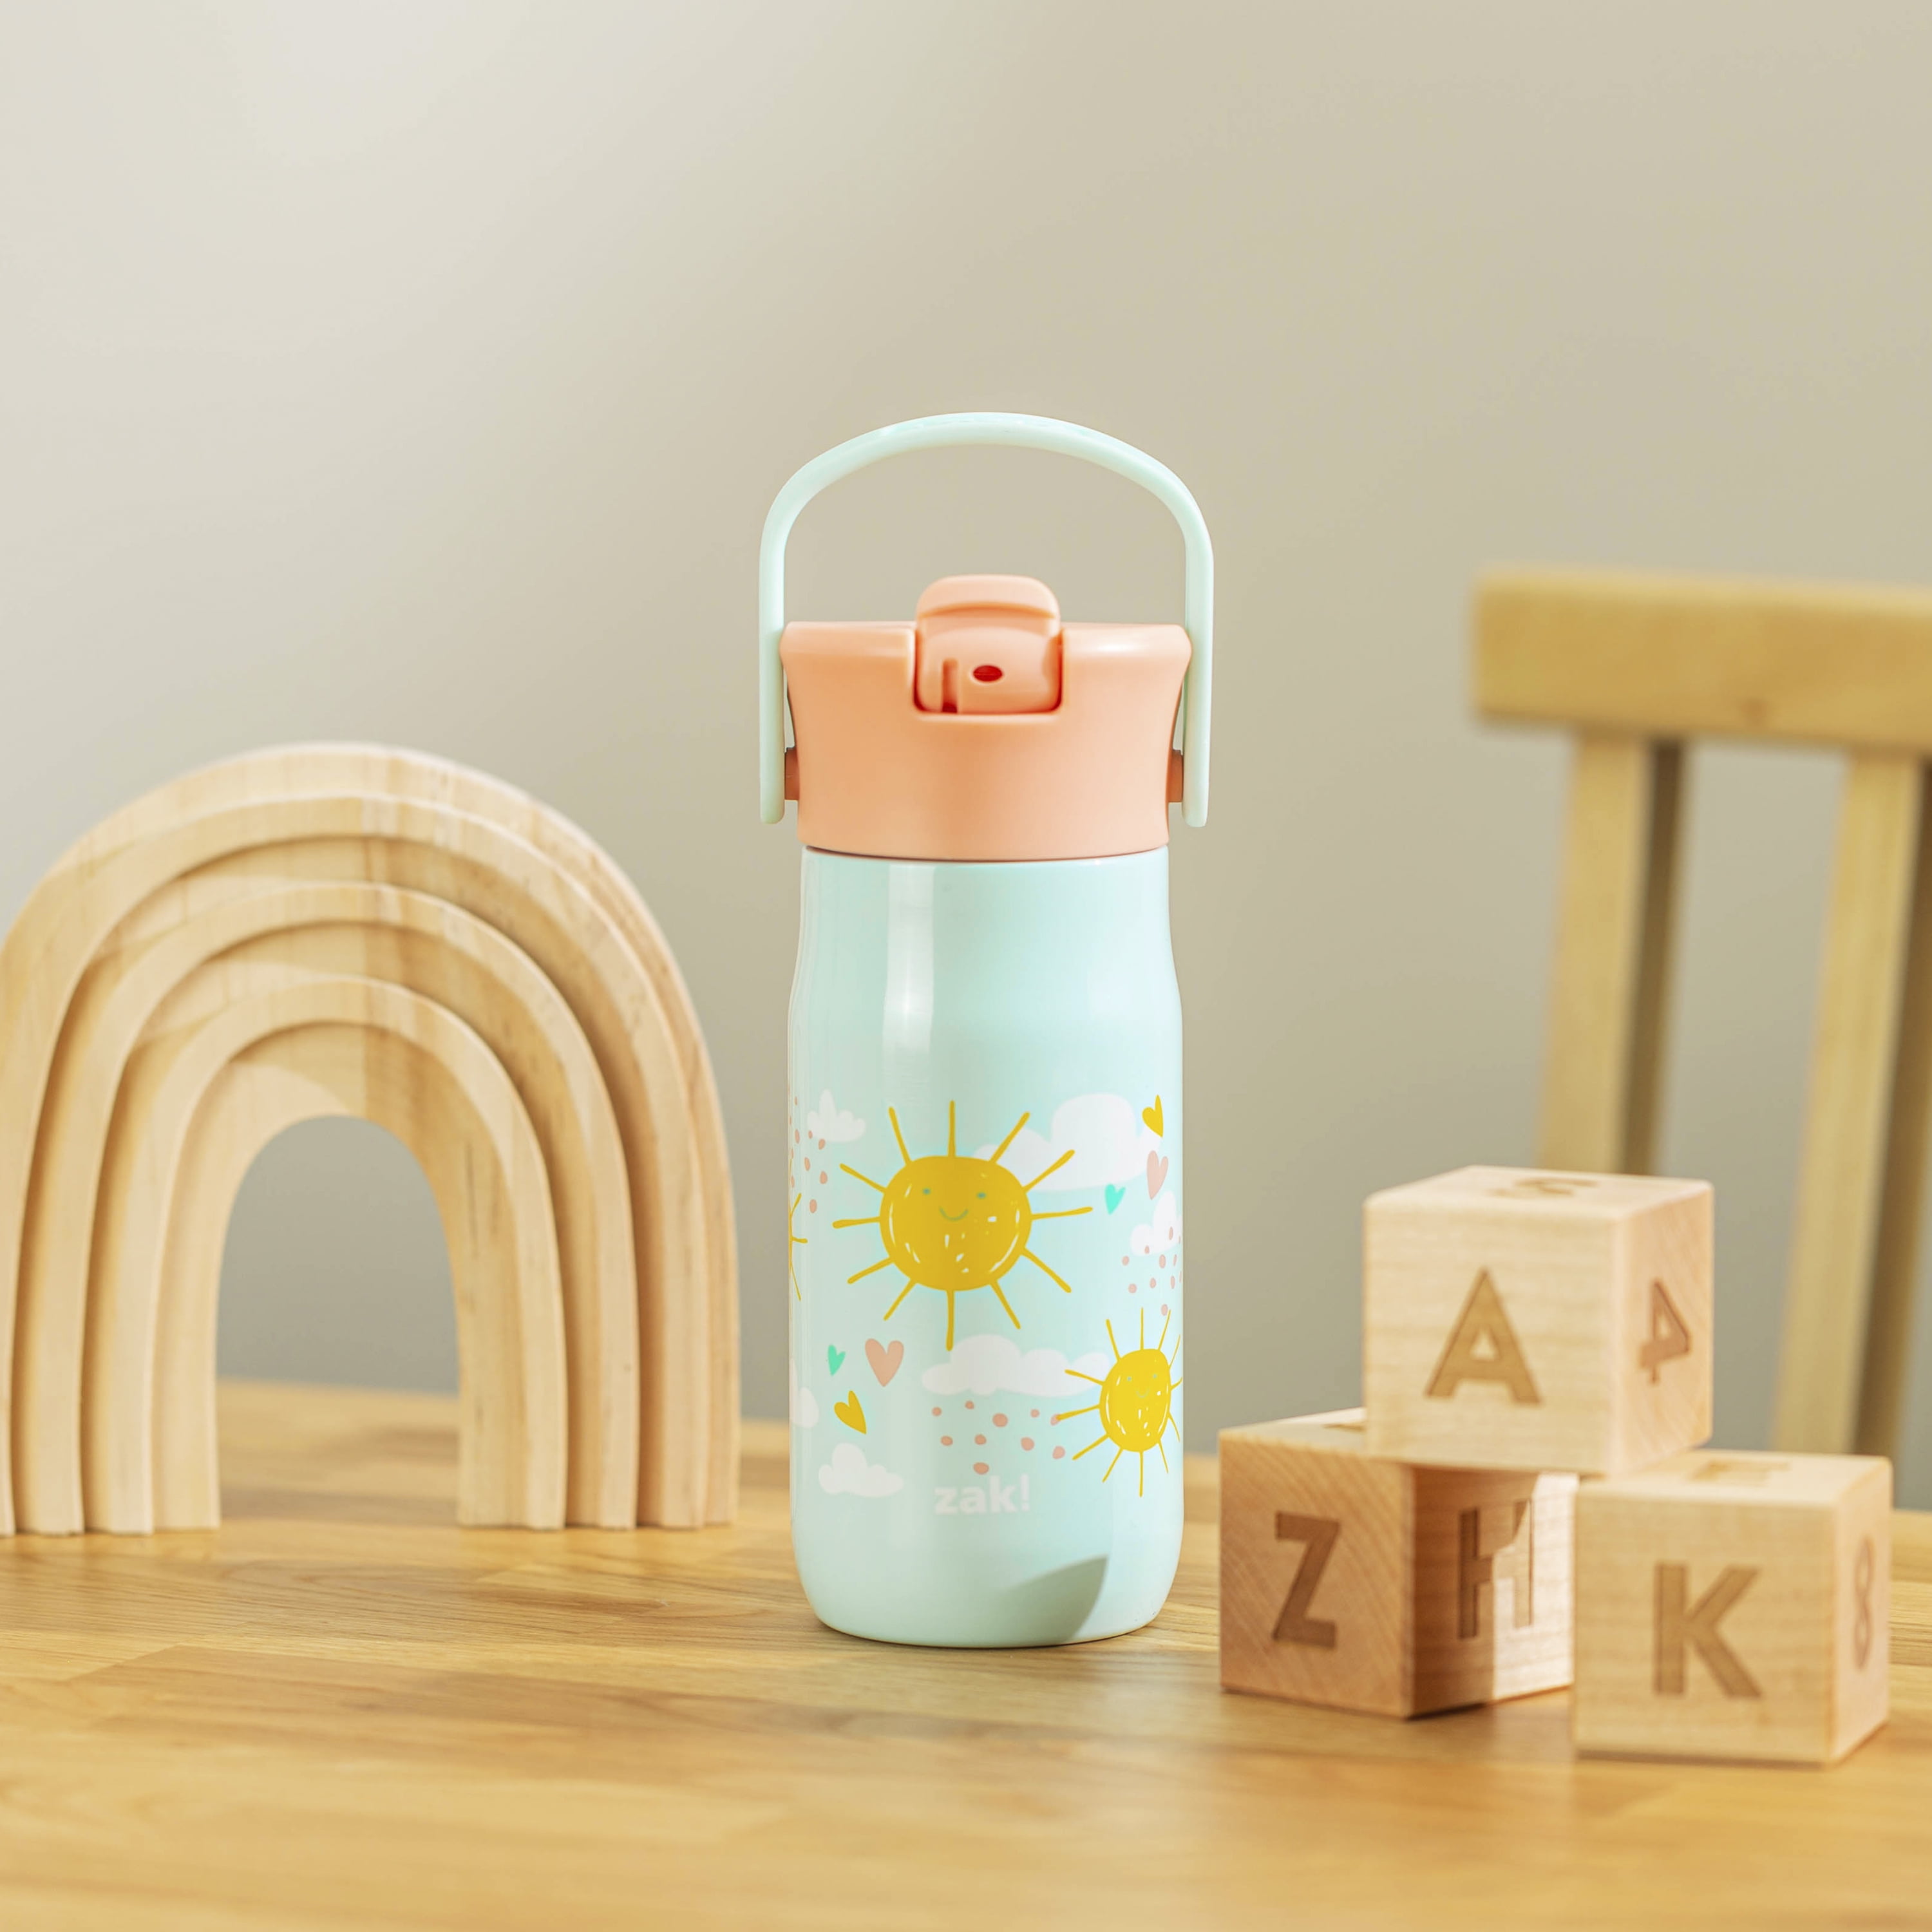 Beacon 14 oz. Insulated Kids Water Bottle from zak! designs 